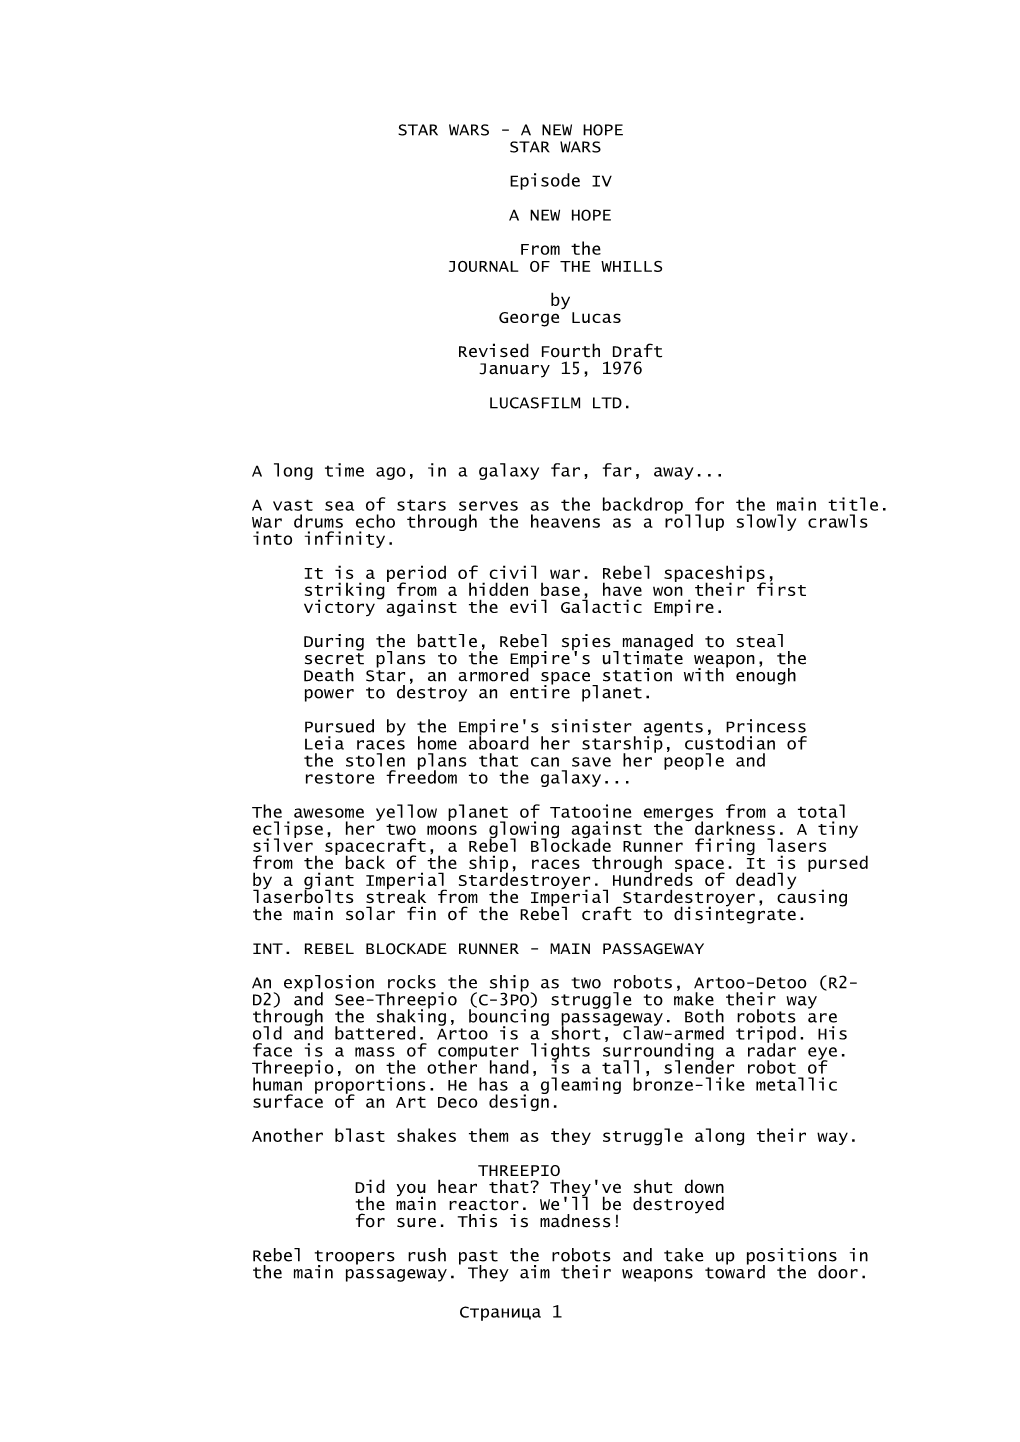 STAR WARS - a NEW HOPE STAR WARS Episode IV a NEW HOPE from the JOURNAL of the WHILLS by George Lucas Revised Fourth Draft January 15, 1976 LUCASFILM LTD